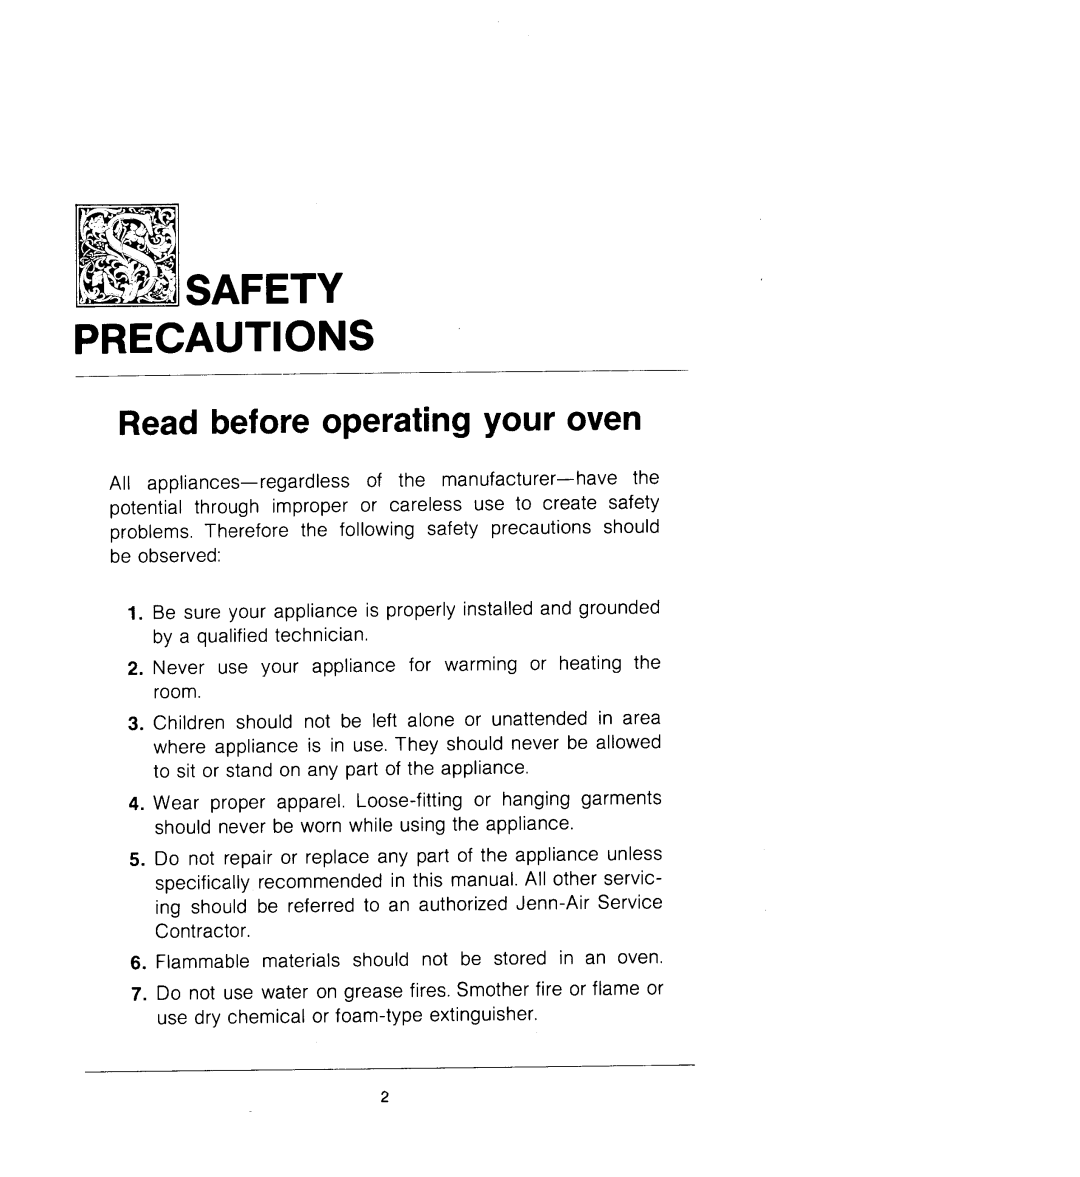 Jenn-Air W225, W122 manual Safety Precautions, Read before operating your oven 